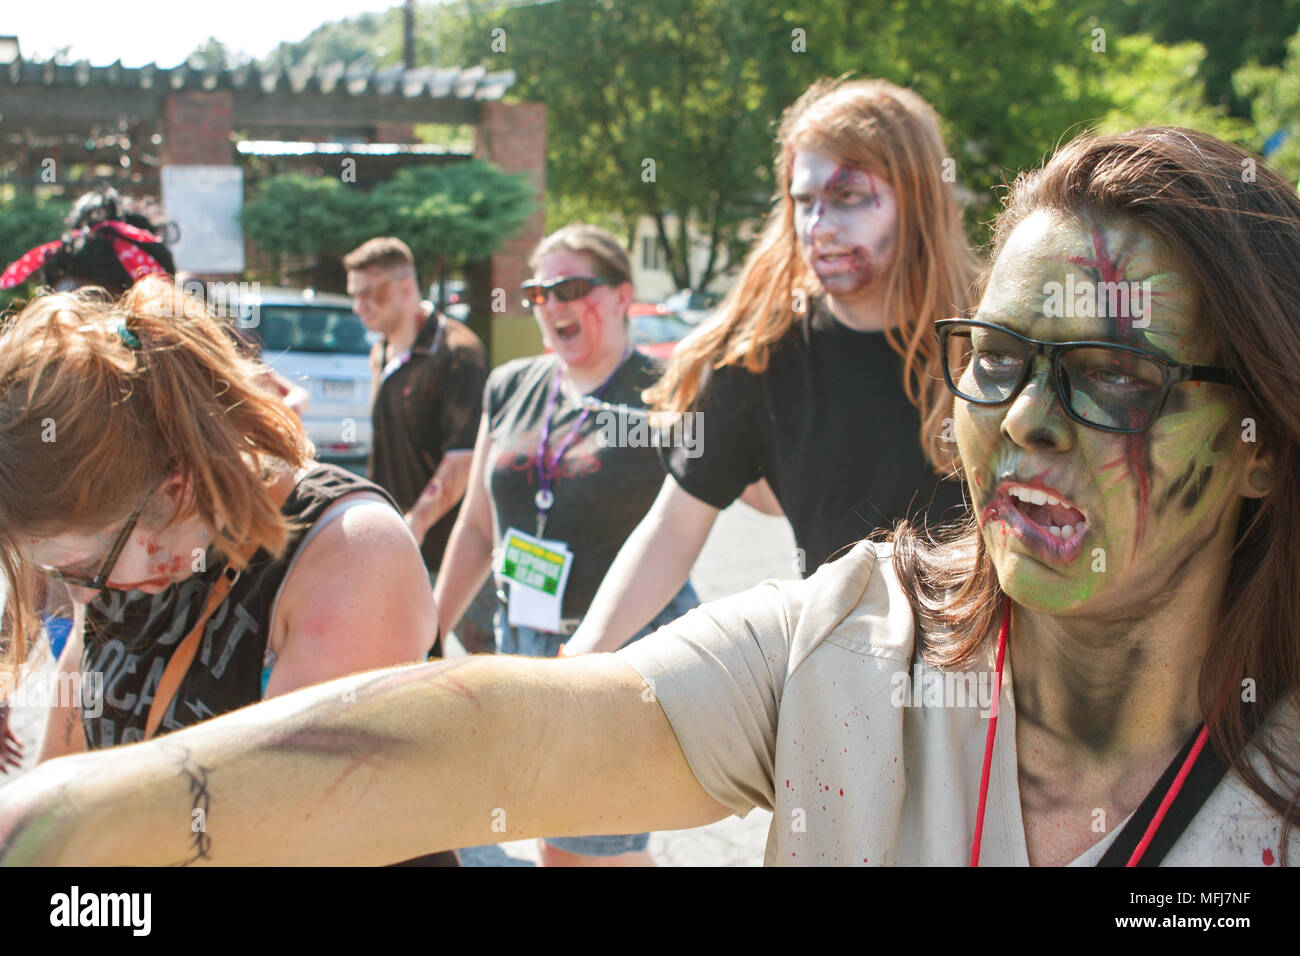 A horde of bloody zombies stagger to nearby bars as part of the Atlanta Zombie Pub Crawl on July 25, 2015 in Atlanta, GA. Stock Photo